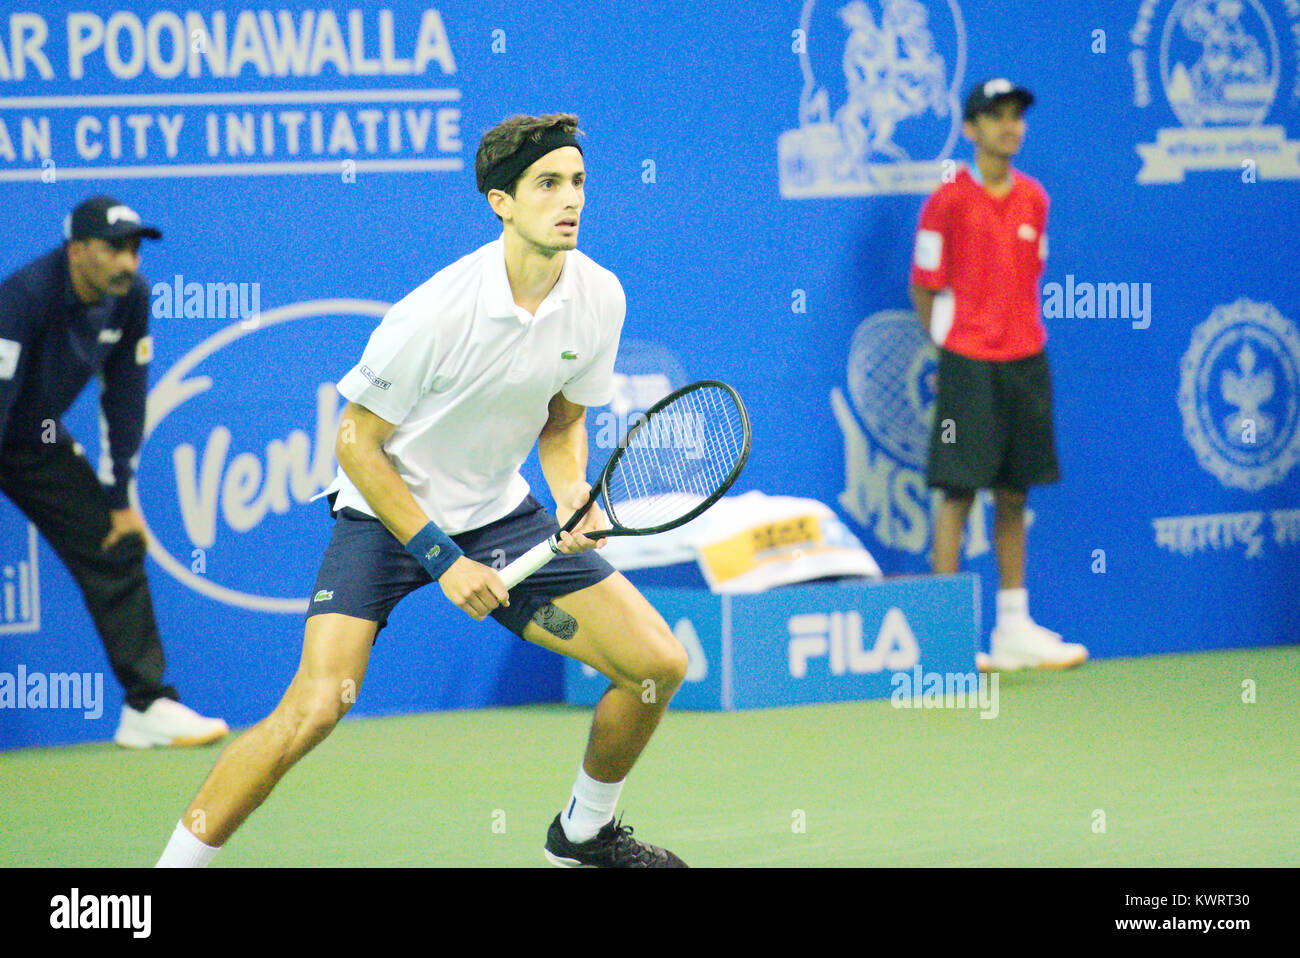 Pune, India. 4th January 2018. Pierre-Hugues Herbert of France in action in a quarter final match of the Singles competition at Tata Open Maharashtra at the Mahalunge Balewadi Tennis Stadium in Pune, India. Credit: Karunesh Johri/Alamy Live News. Stock Photo